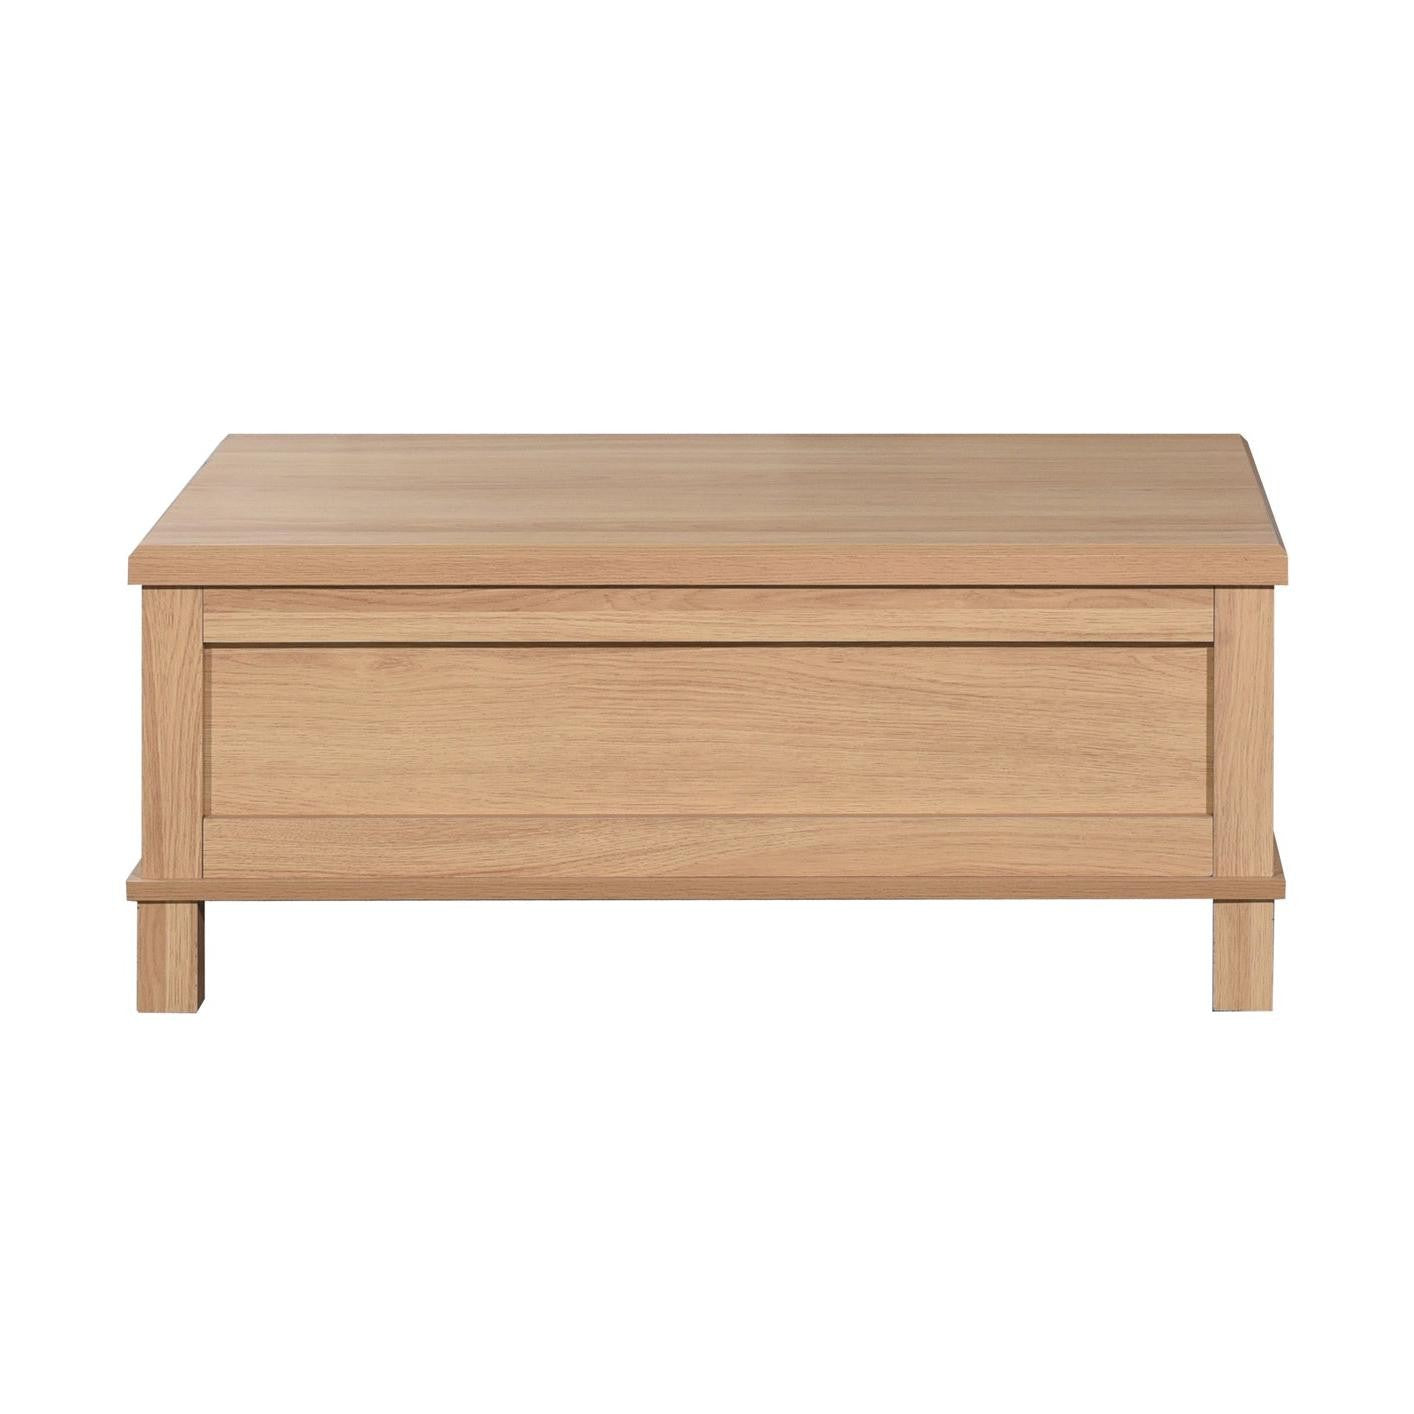 Sherwell Warm Oak Coffee Table with 2 Drawers